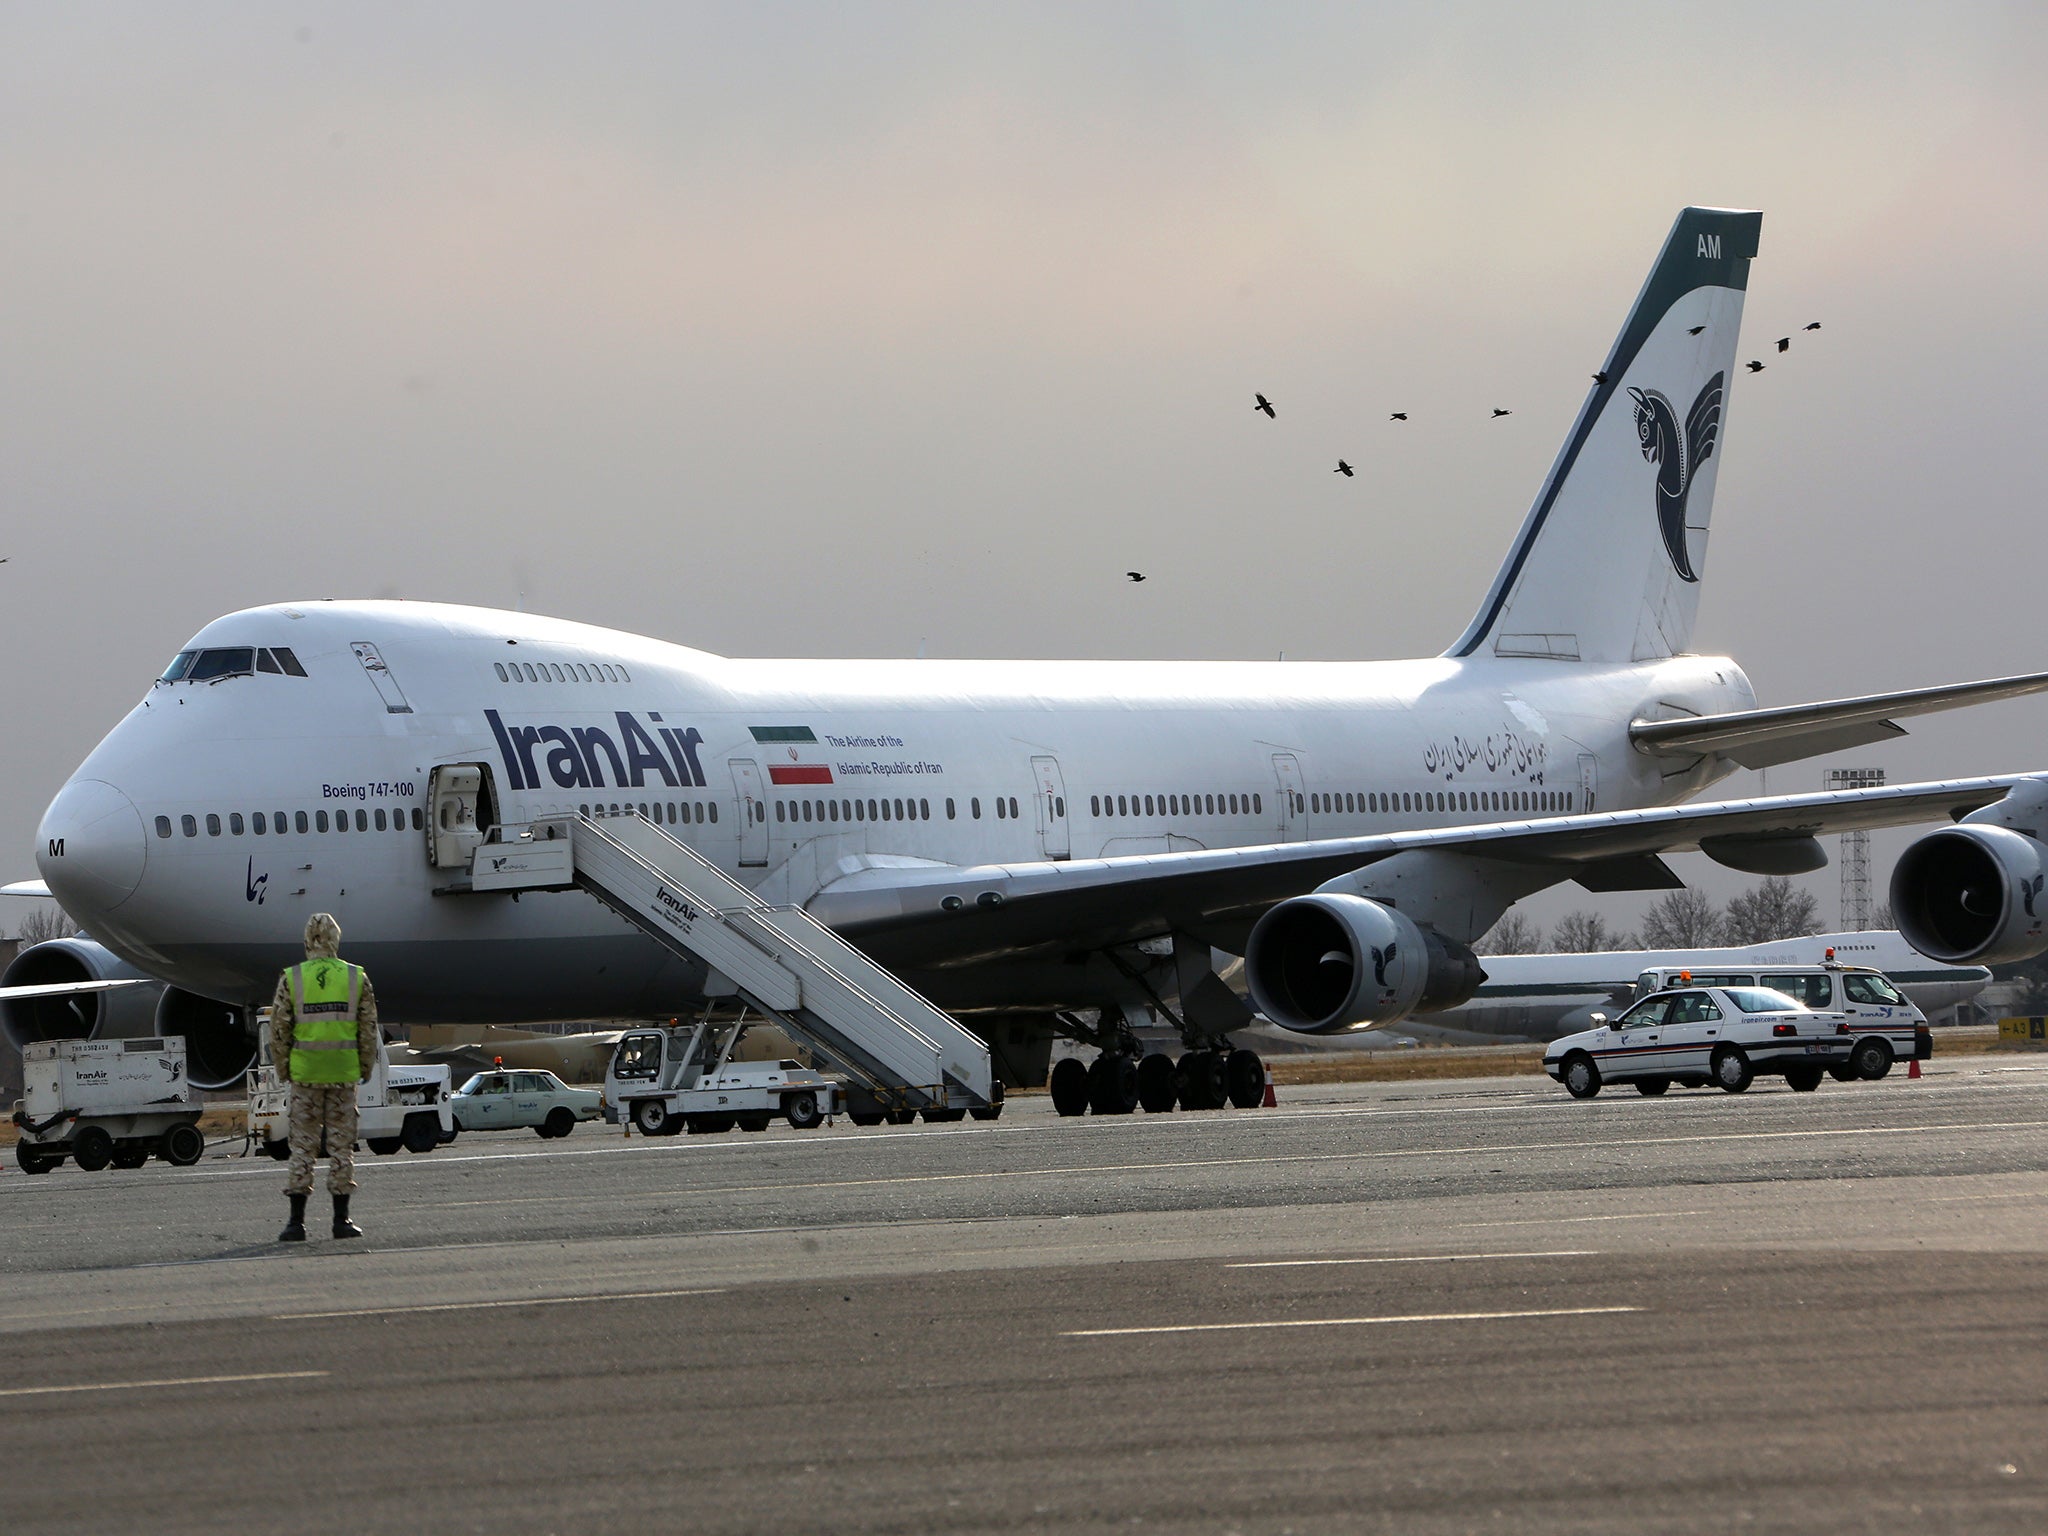 Iran Air, the oldest airline in the Middle East, at one time held the record for the longest scheduled flight: over 12 hours from Tehran to New York JFK.